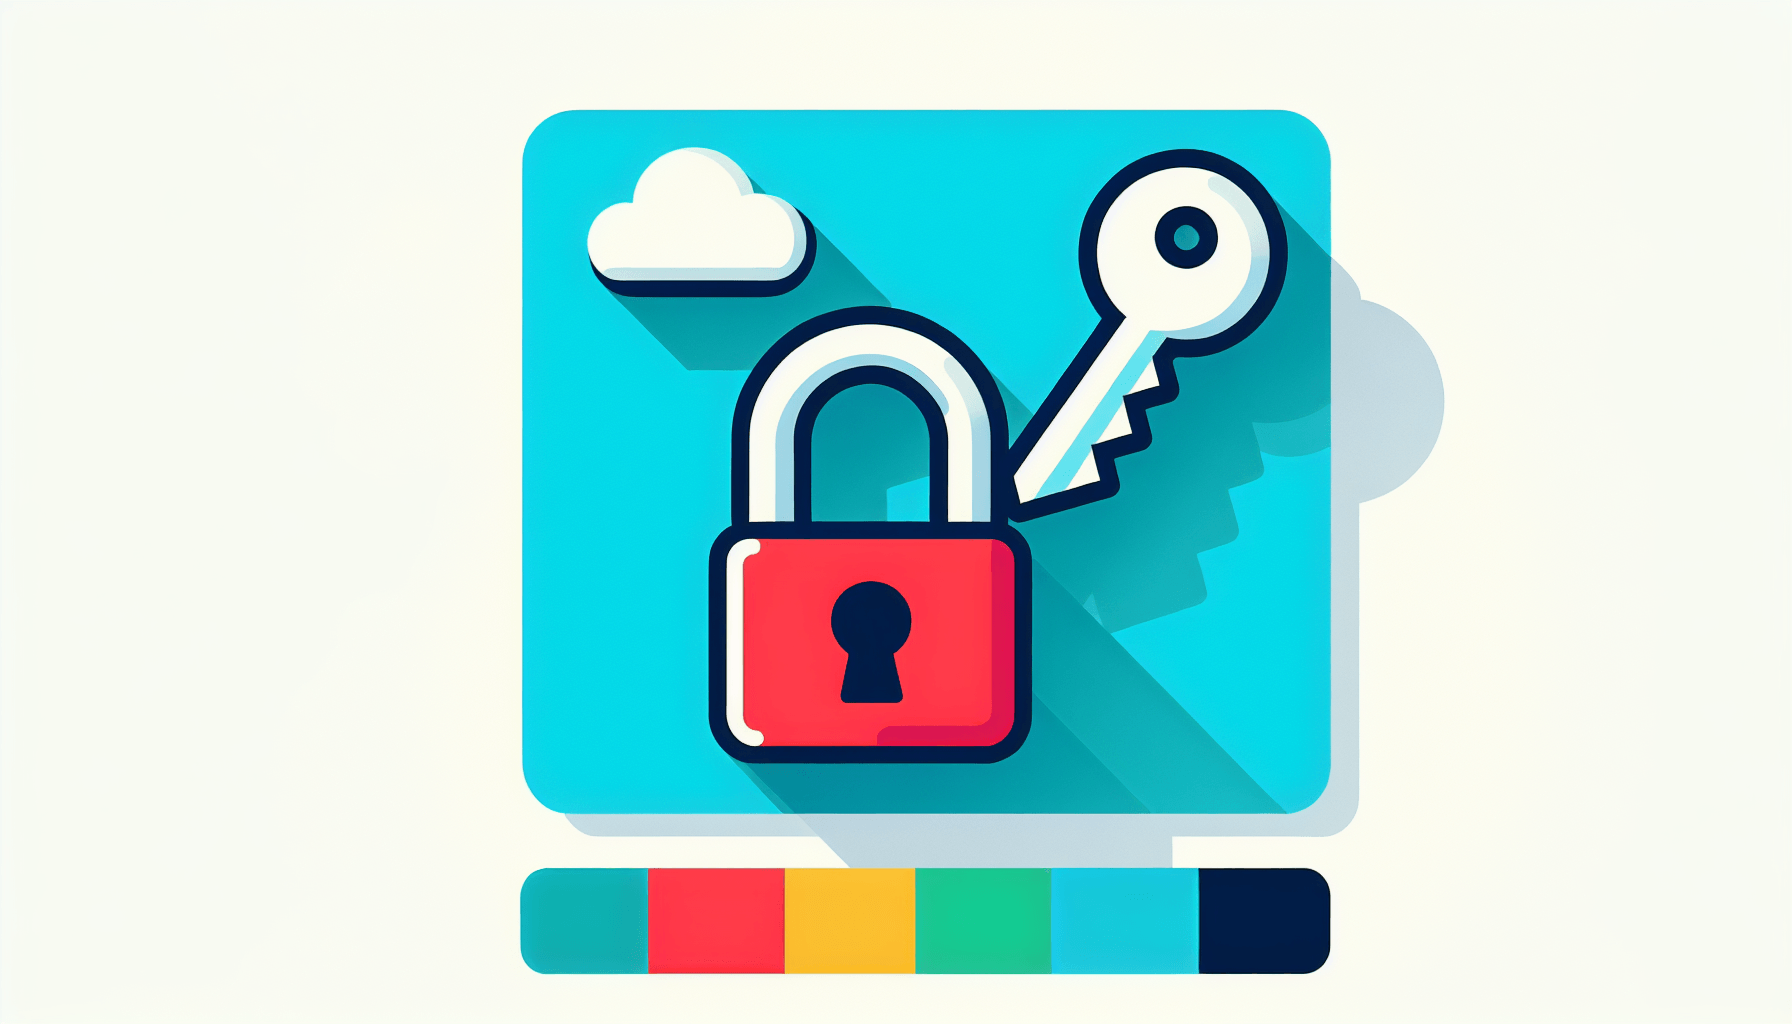 Lock and key in flat illustration style and white background, red #f47574, green #88c7a8, yellow #fcc44b, and blue #645bc8 colors.